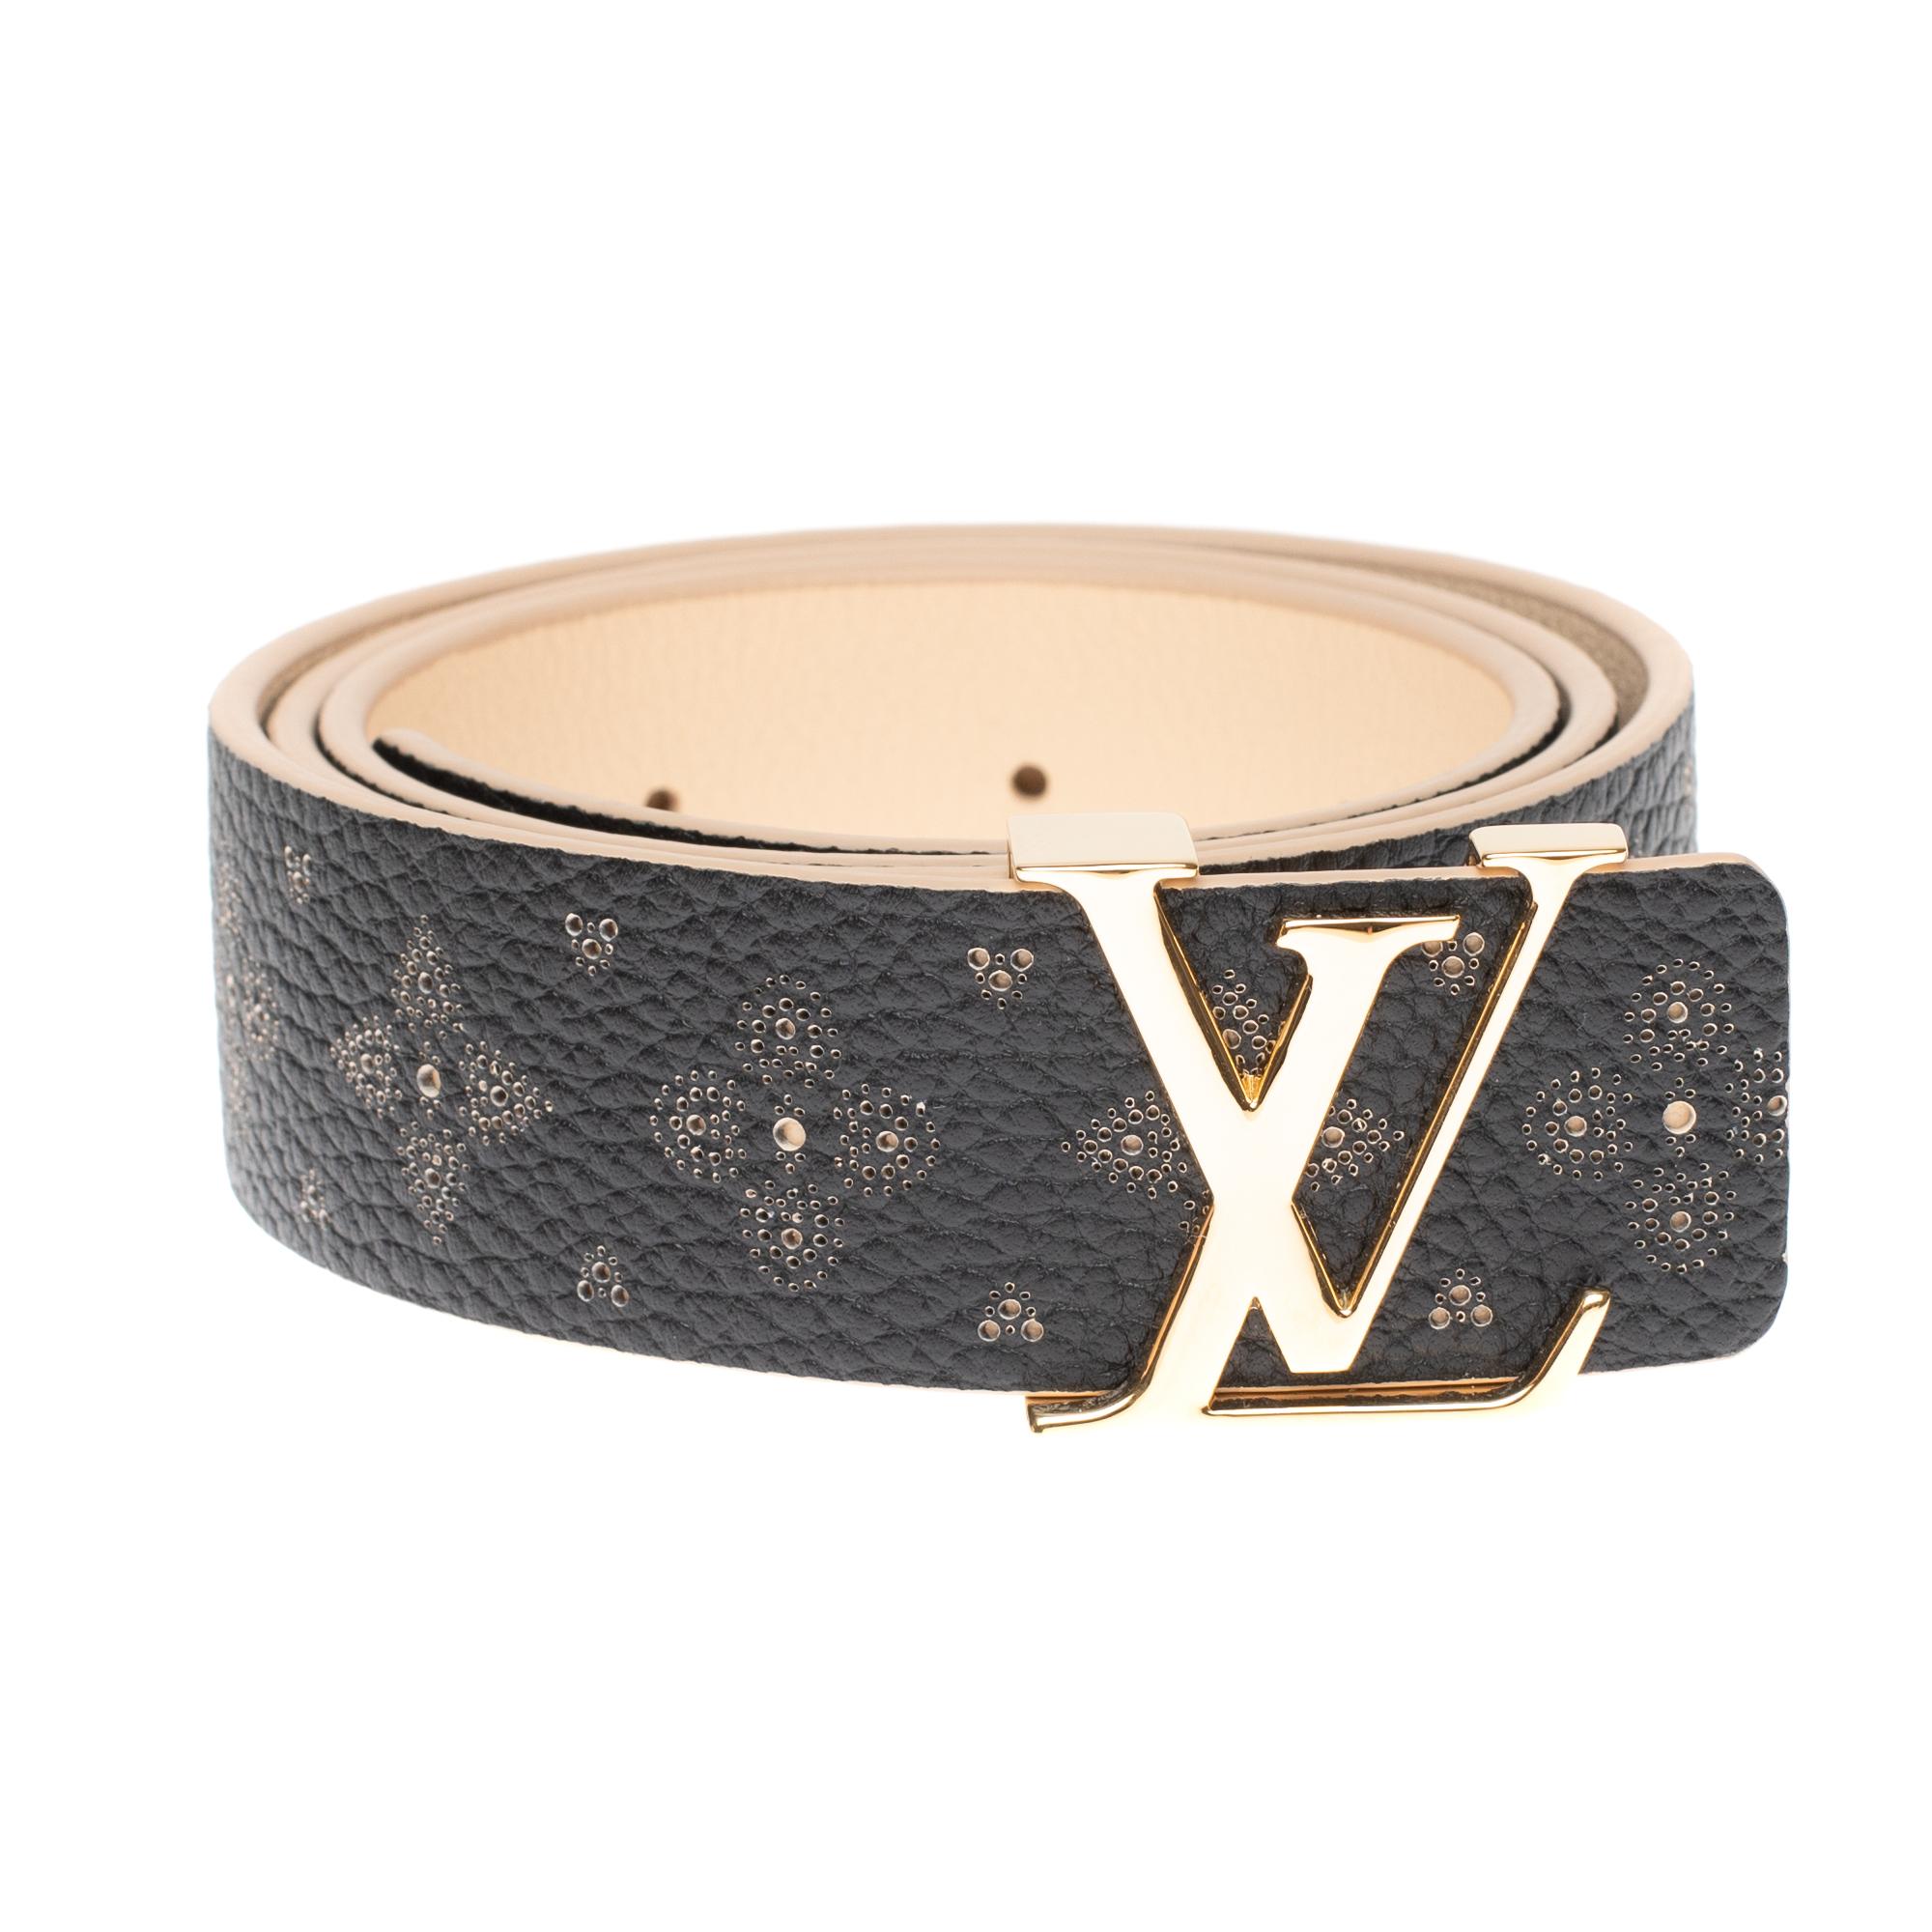 Superb Women’s Belt Louis Vuitton limited-edition leather Taurillon black, beige lapel, embossed with brand designs
Gold-plated metal LV buckle
Size 85
Dimensions: 85 * 34
Comes from the Private sales
New condition, sold with dustbag and box